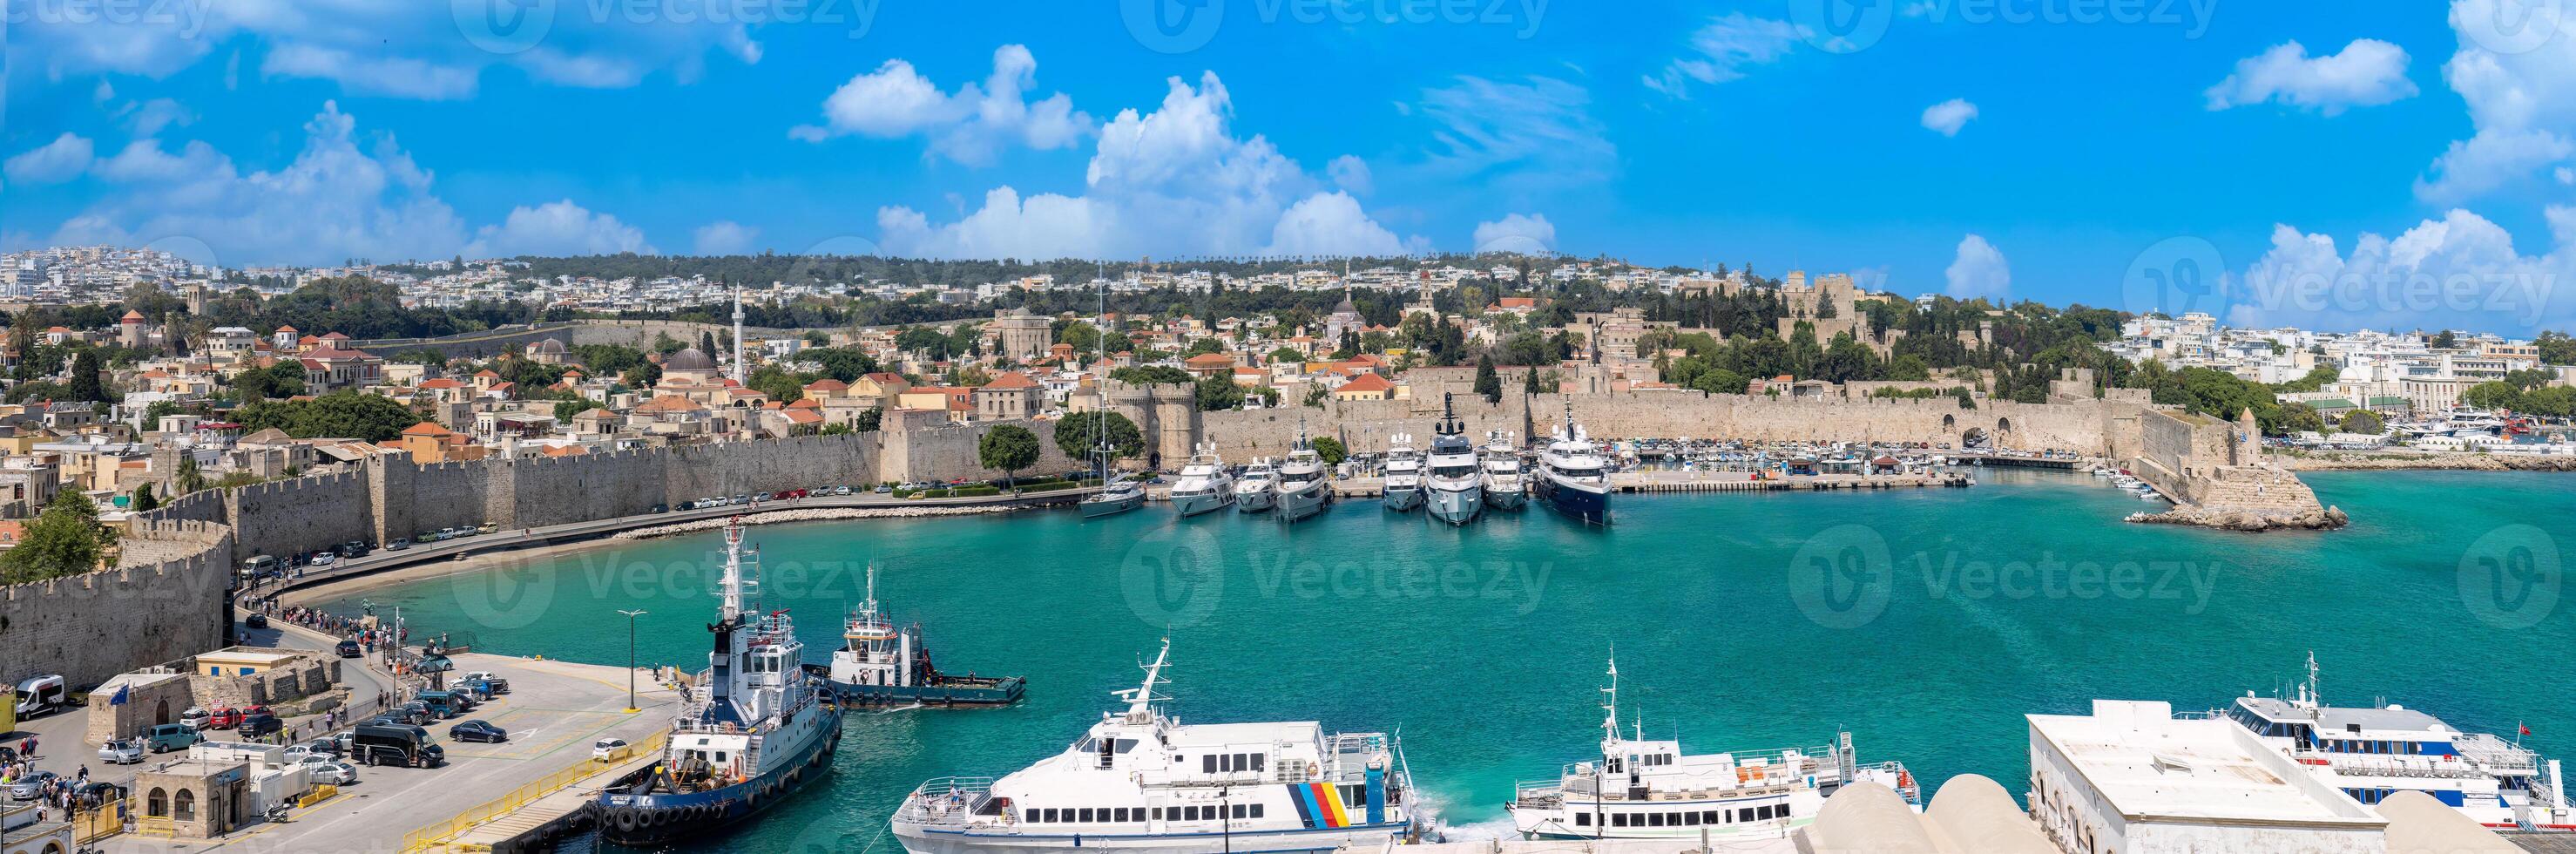 Greece Islands, scenic panoramic sea views of Rhodes island from docked cruise ship photo